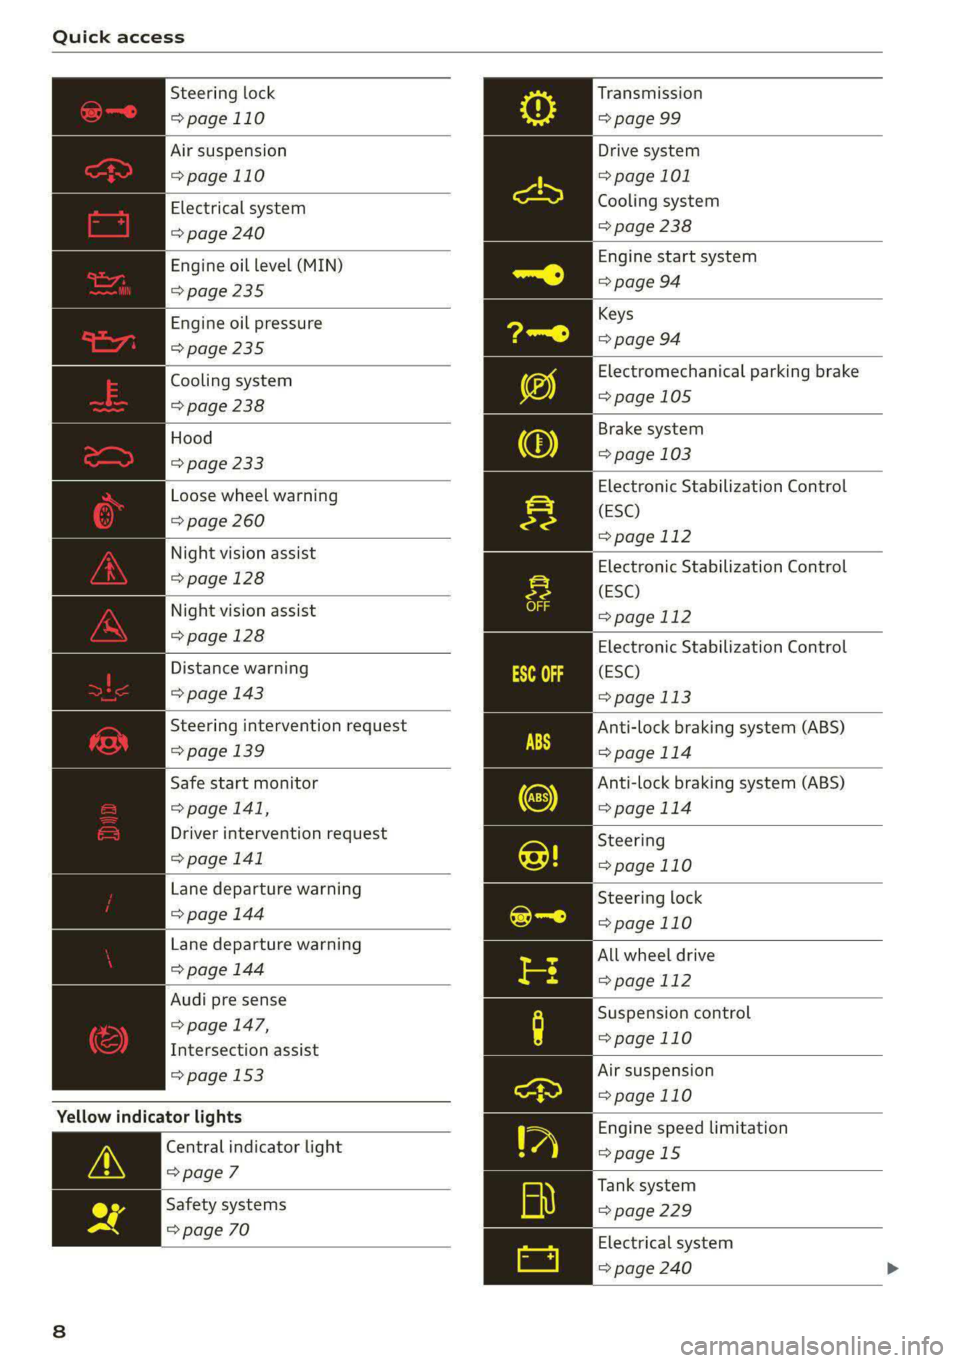 AUDI A6 2020  Owners Manual Quick access 
  
Steering lock 
=> page 110 
Air suspension 
=>page 110 
Electrical system 
=> page 240 
Engine oil level (MIN) 
=> page 235 
Engine oil pressure 
=> page 235 
Cooling system 
=> page 